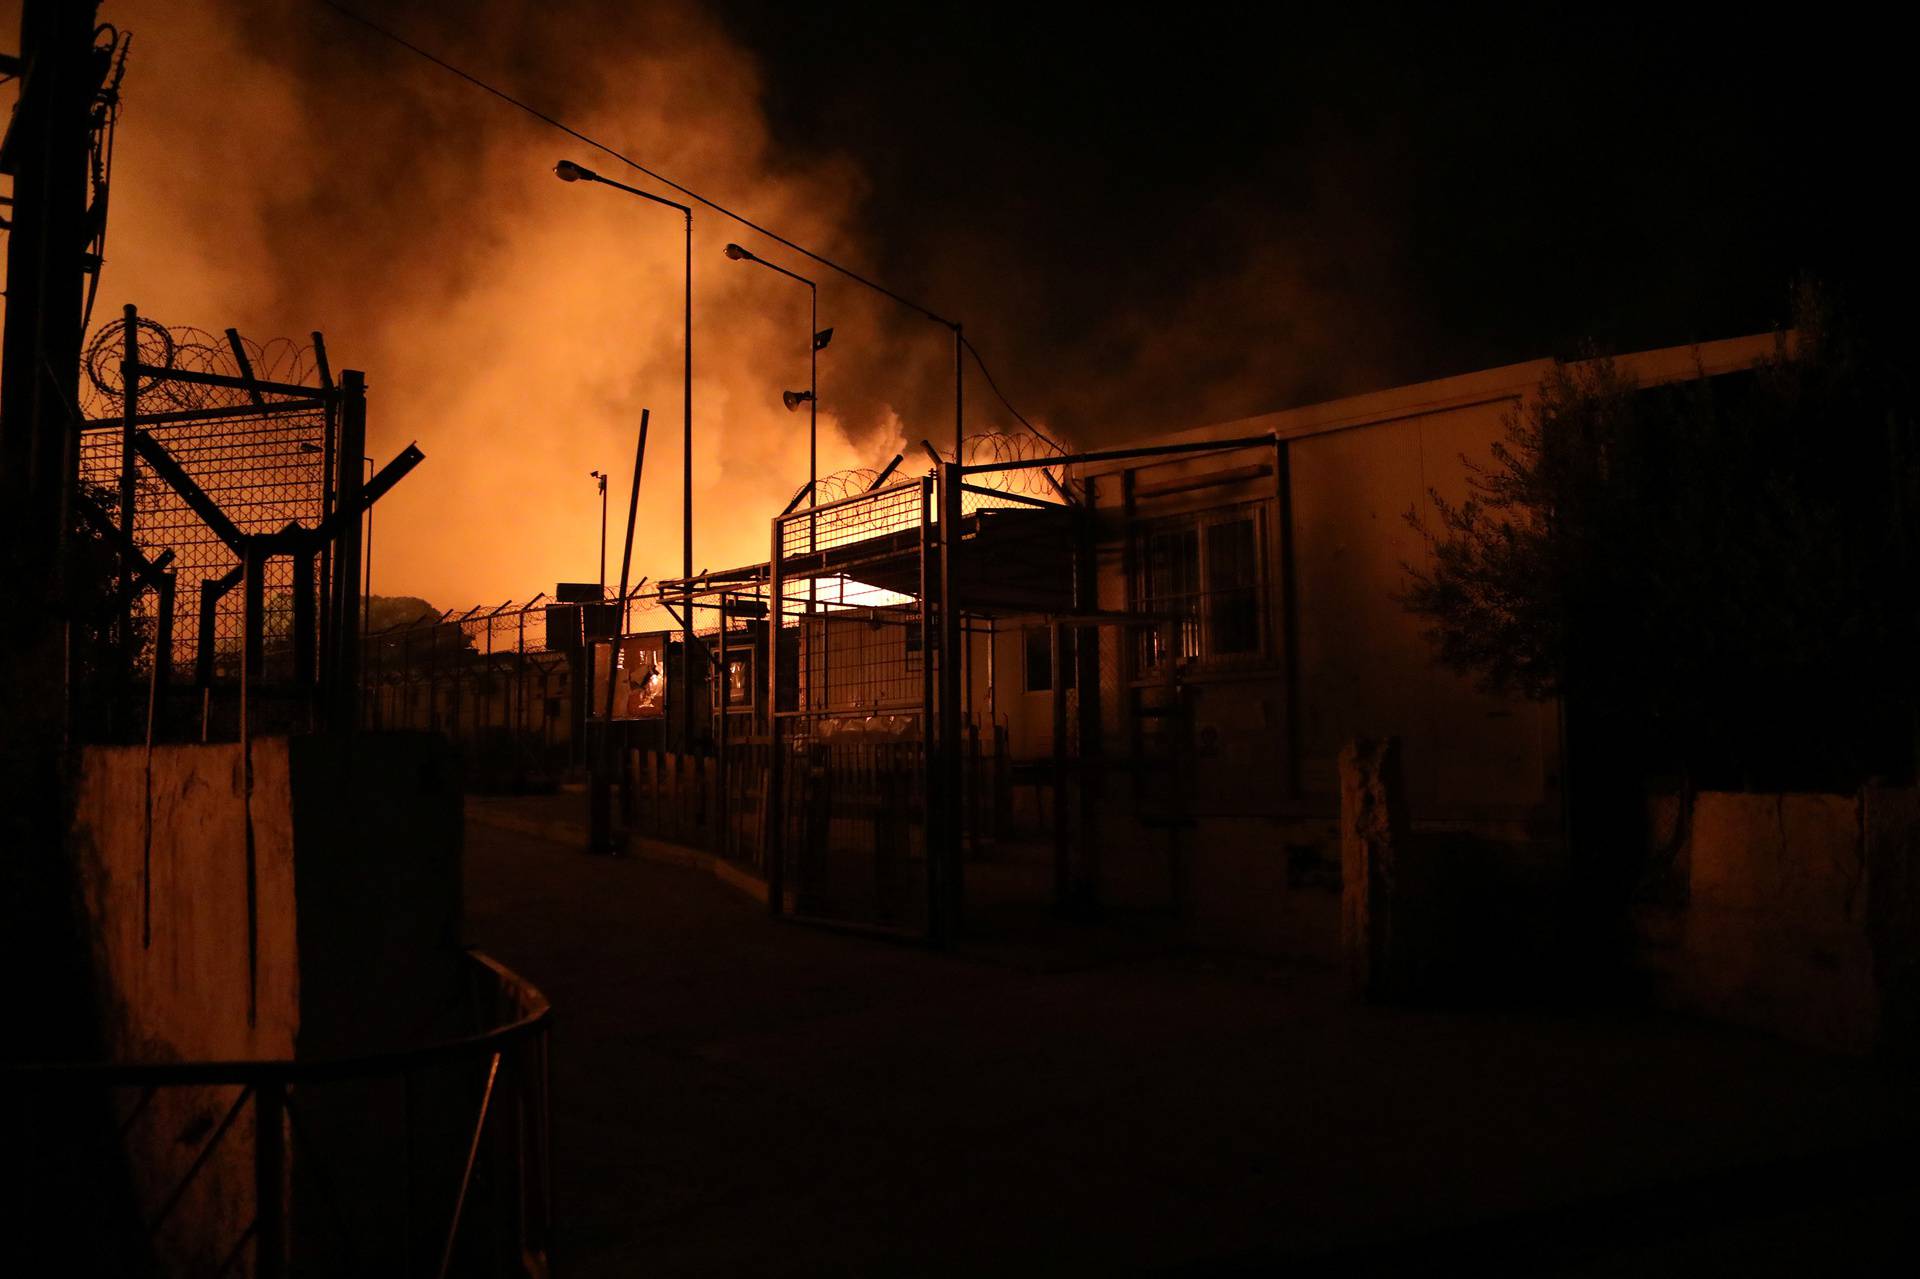 Flames rise as a fire burns at the Moria camp for refugees and migrants on the island of Lesbos